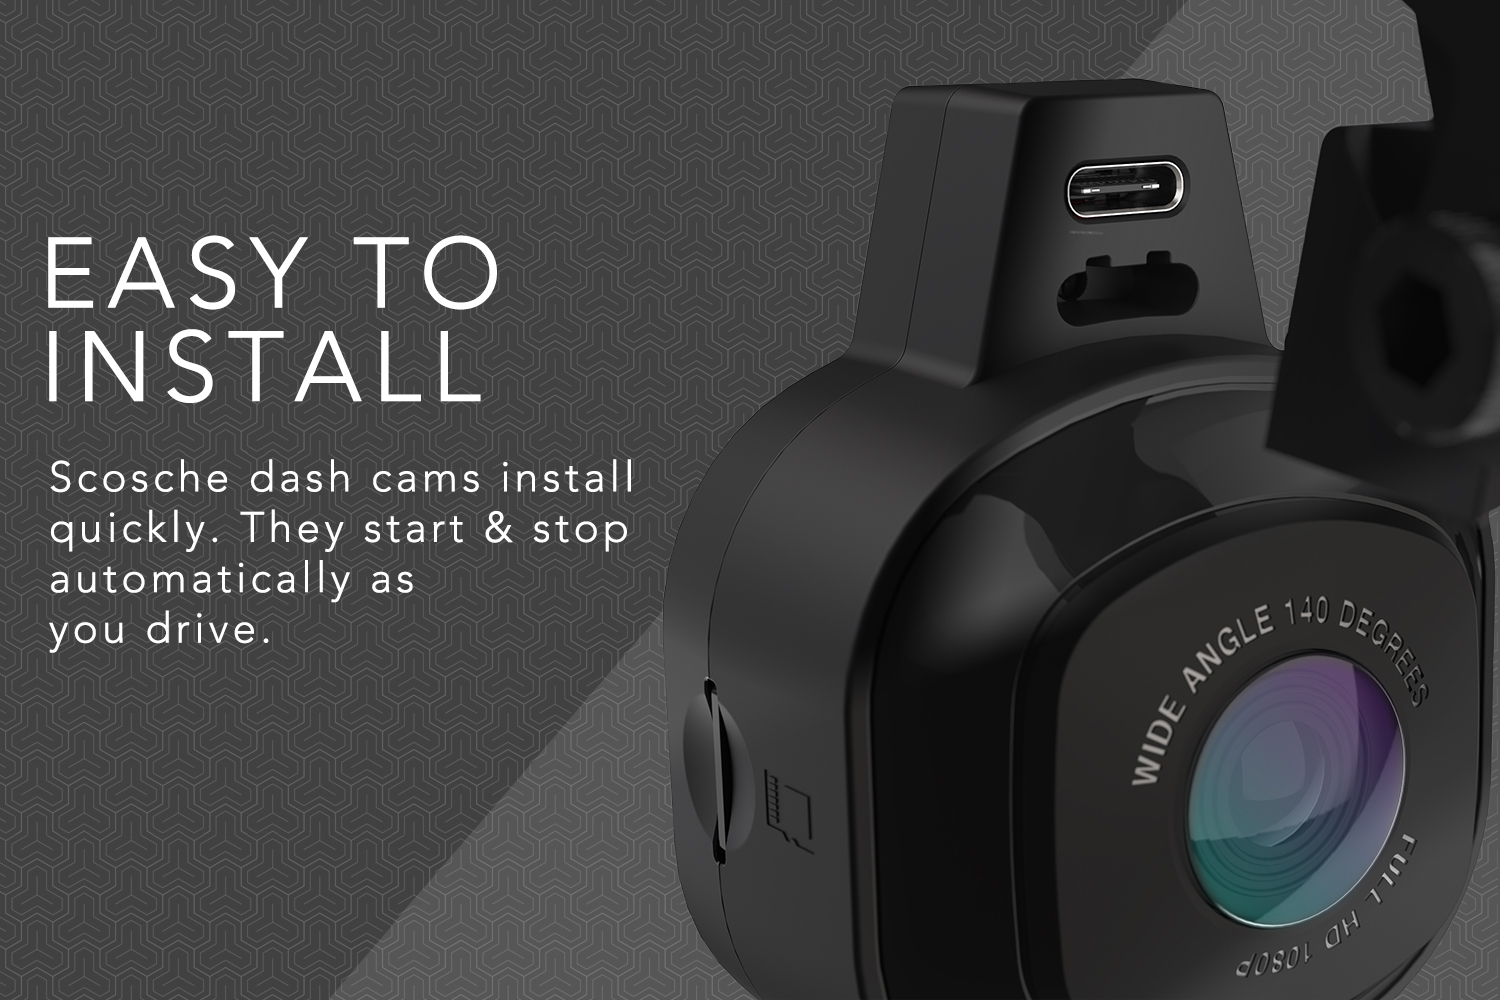 Easy To Install,  Scosche dash cams install quickly. They start & stop automatically as you drive.